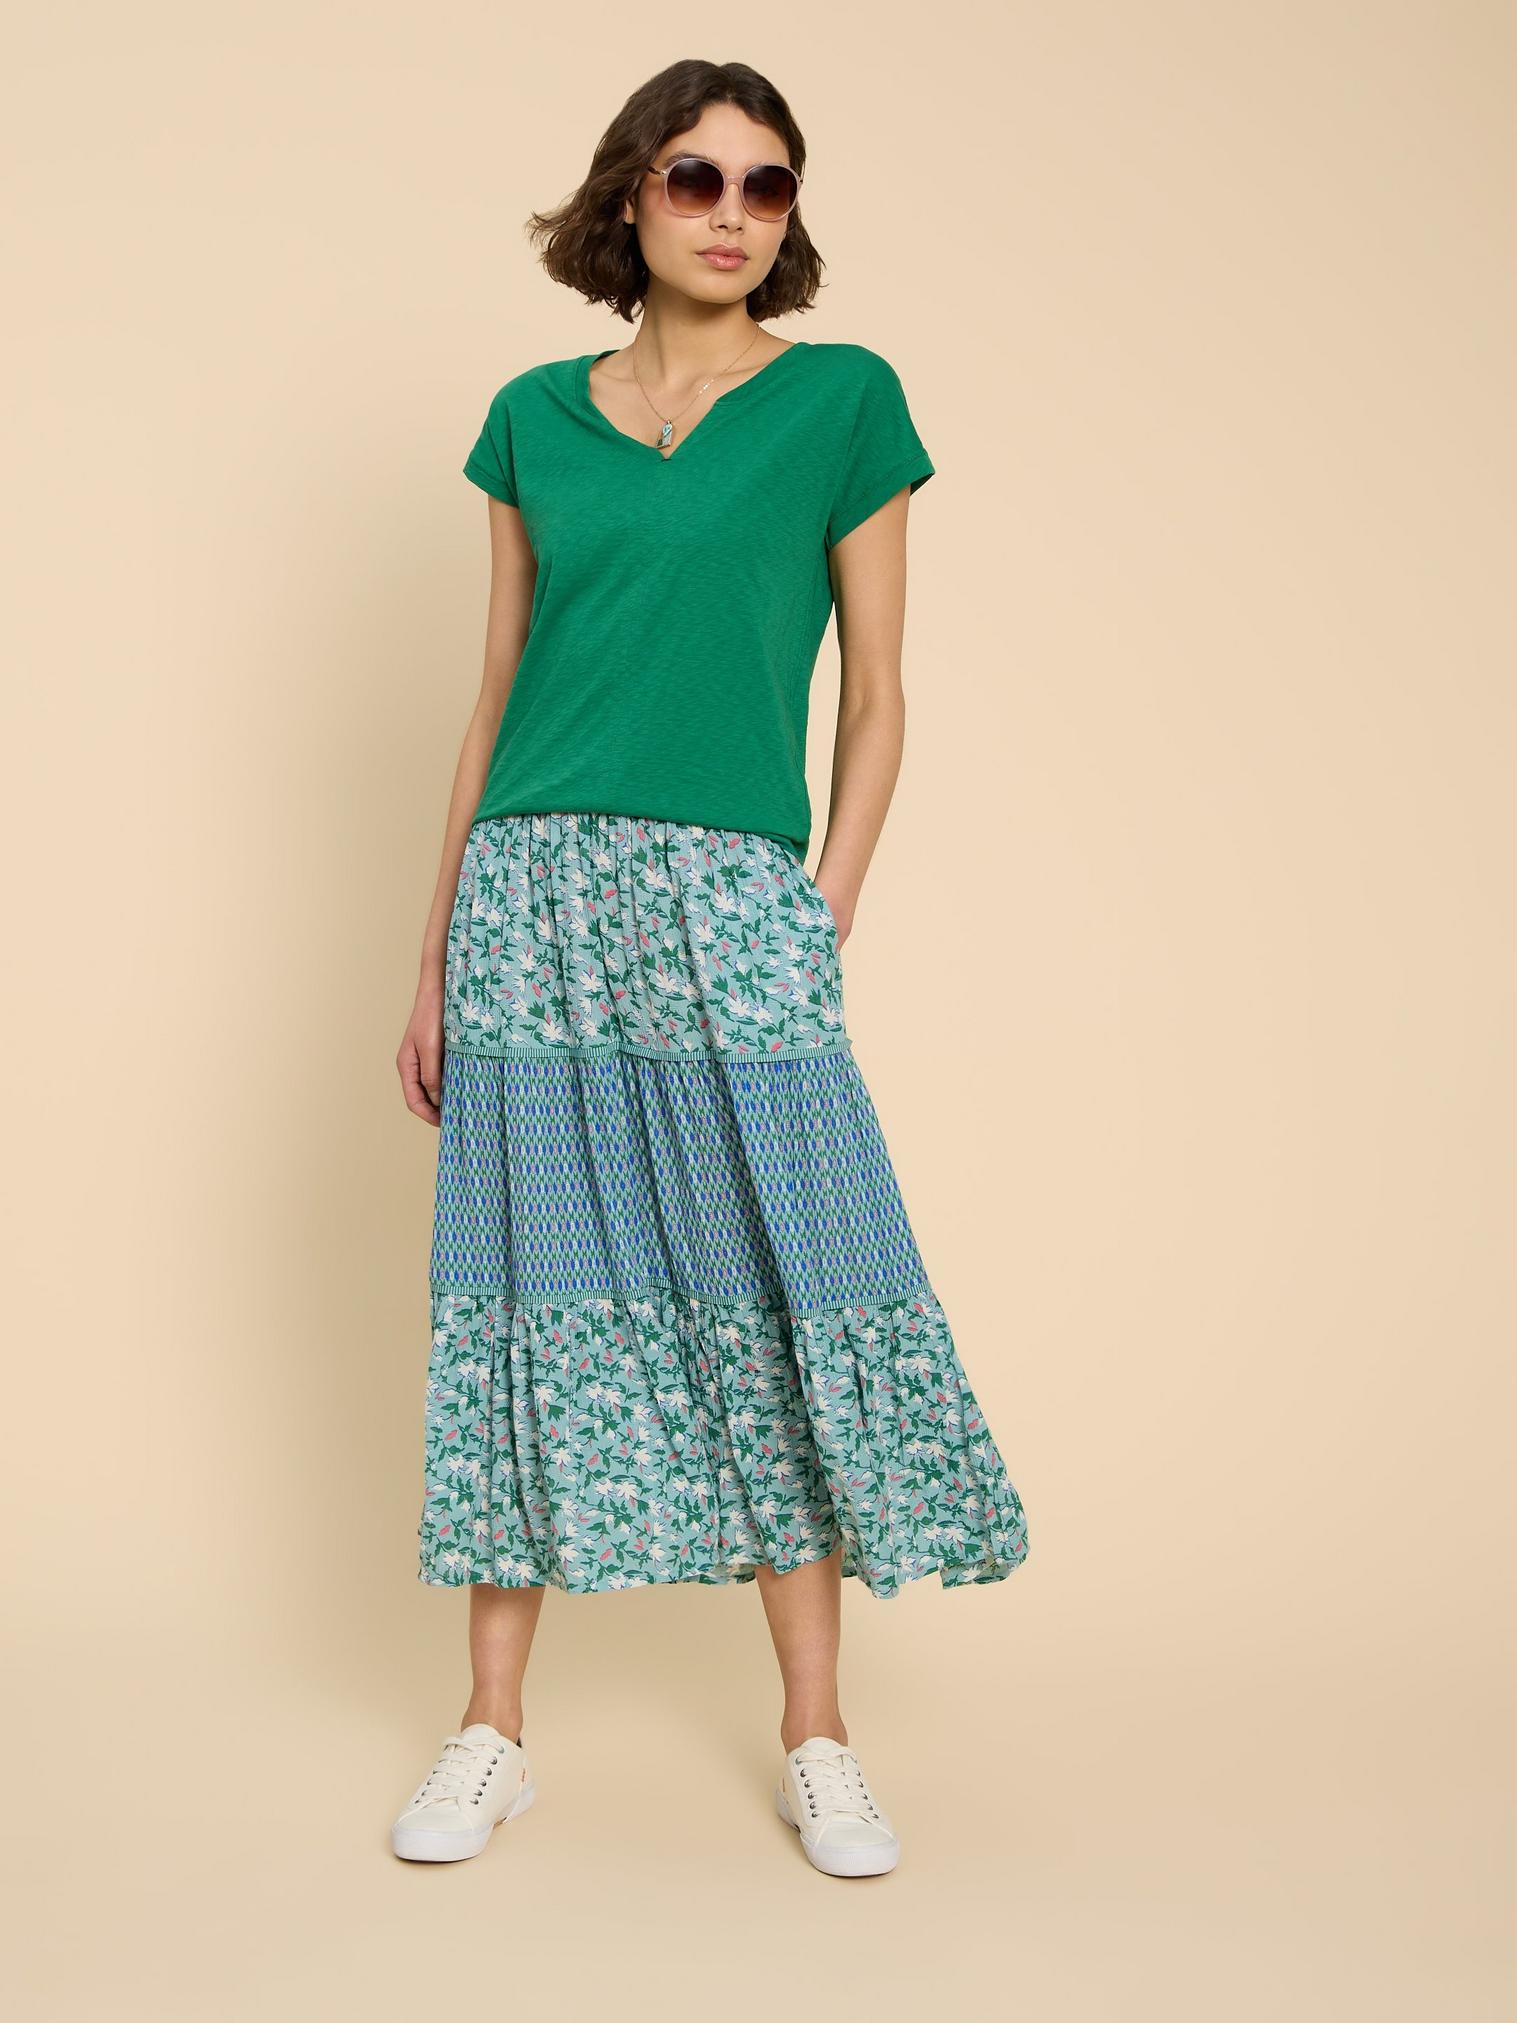 Mabel Mixed Print Skirt in TEAL PR - LIFESTYLE